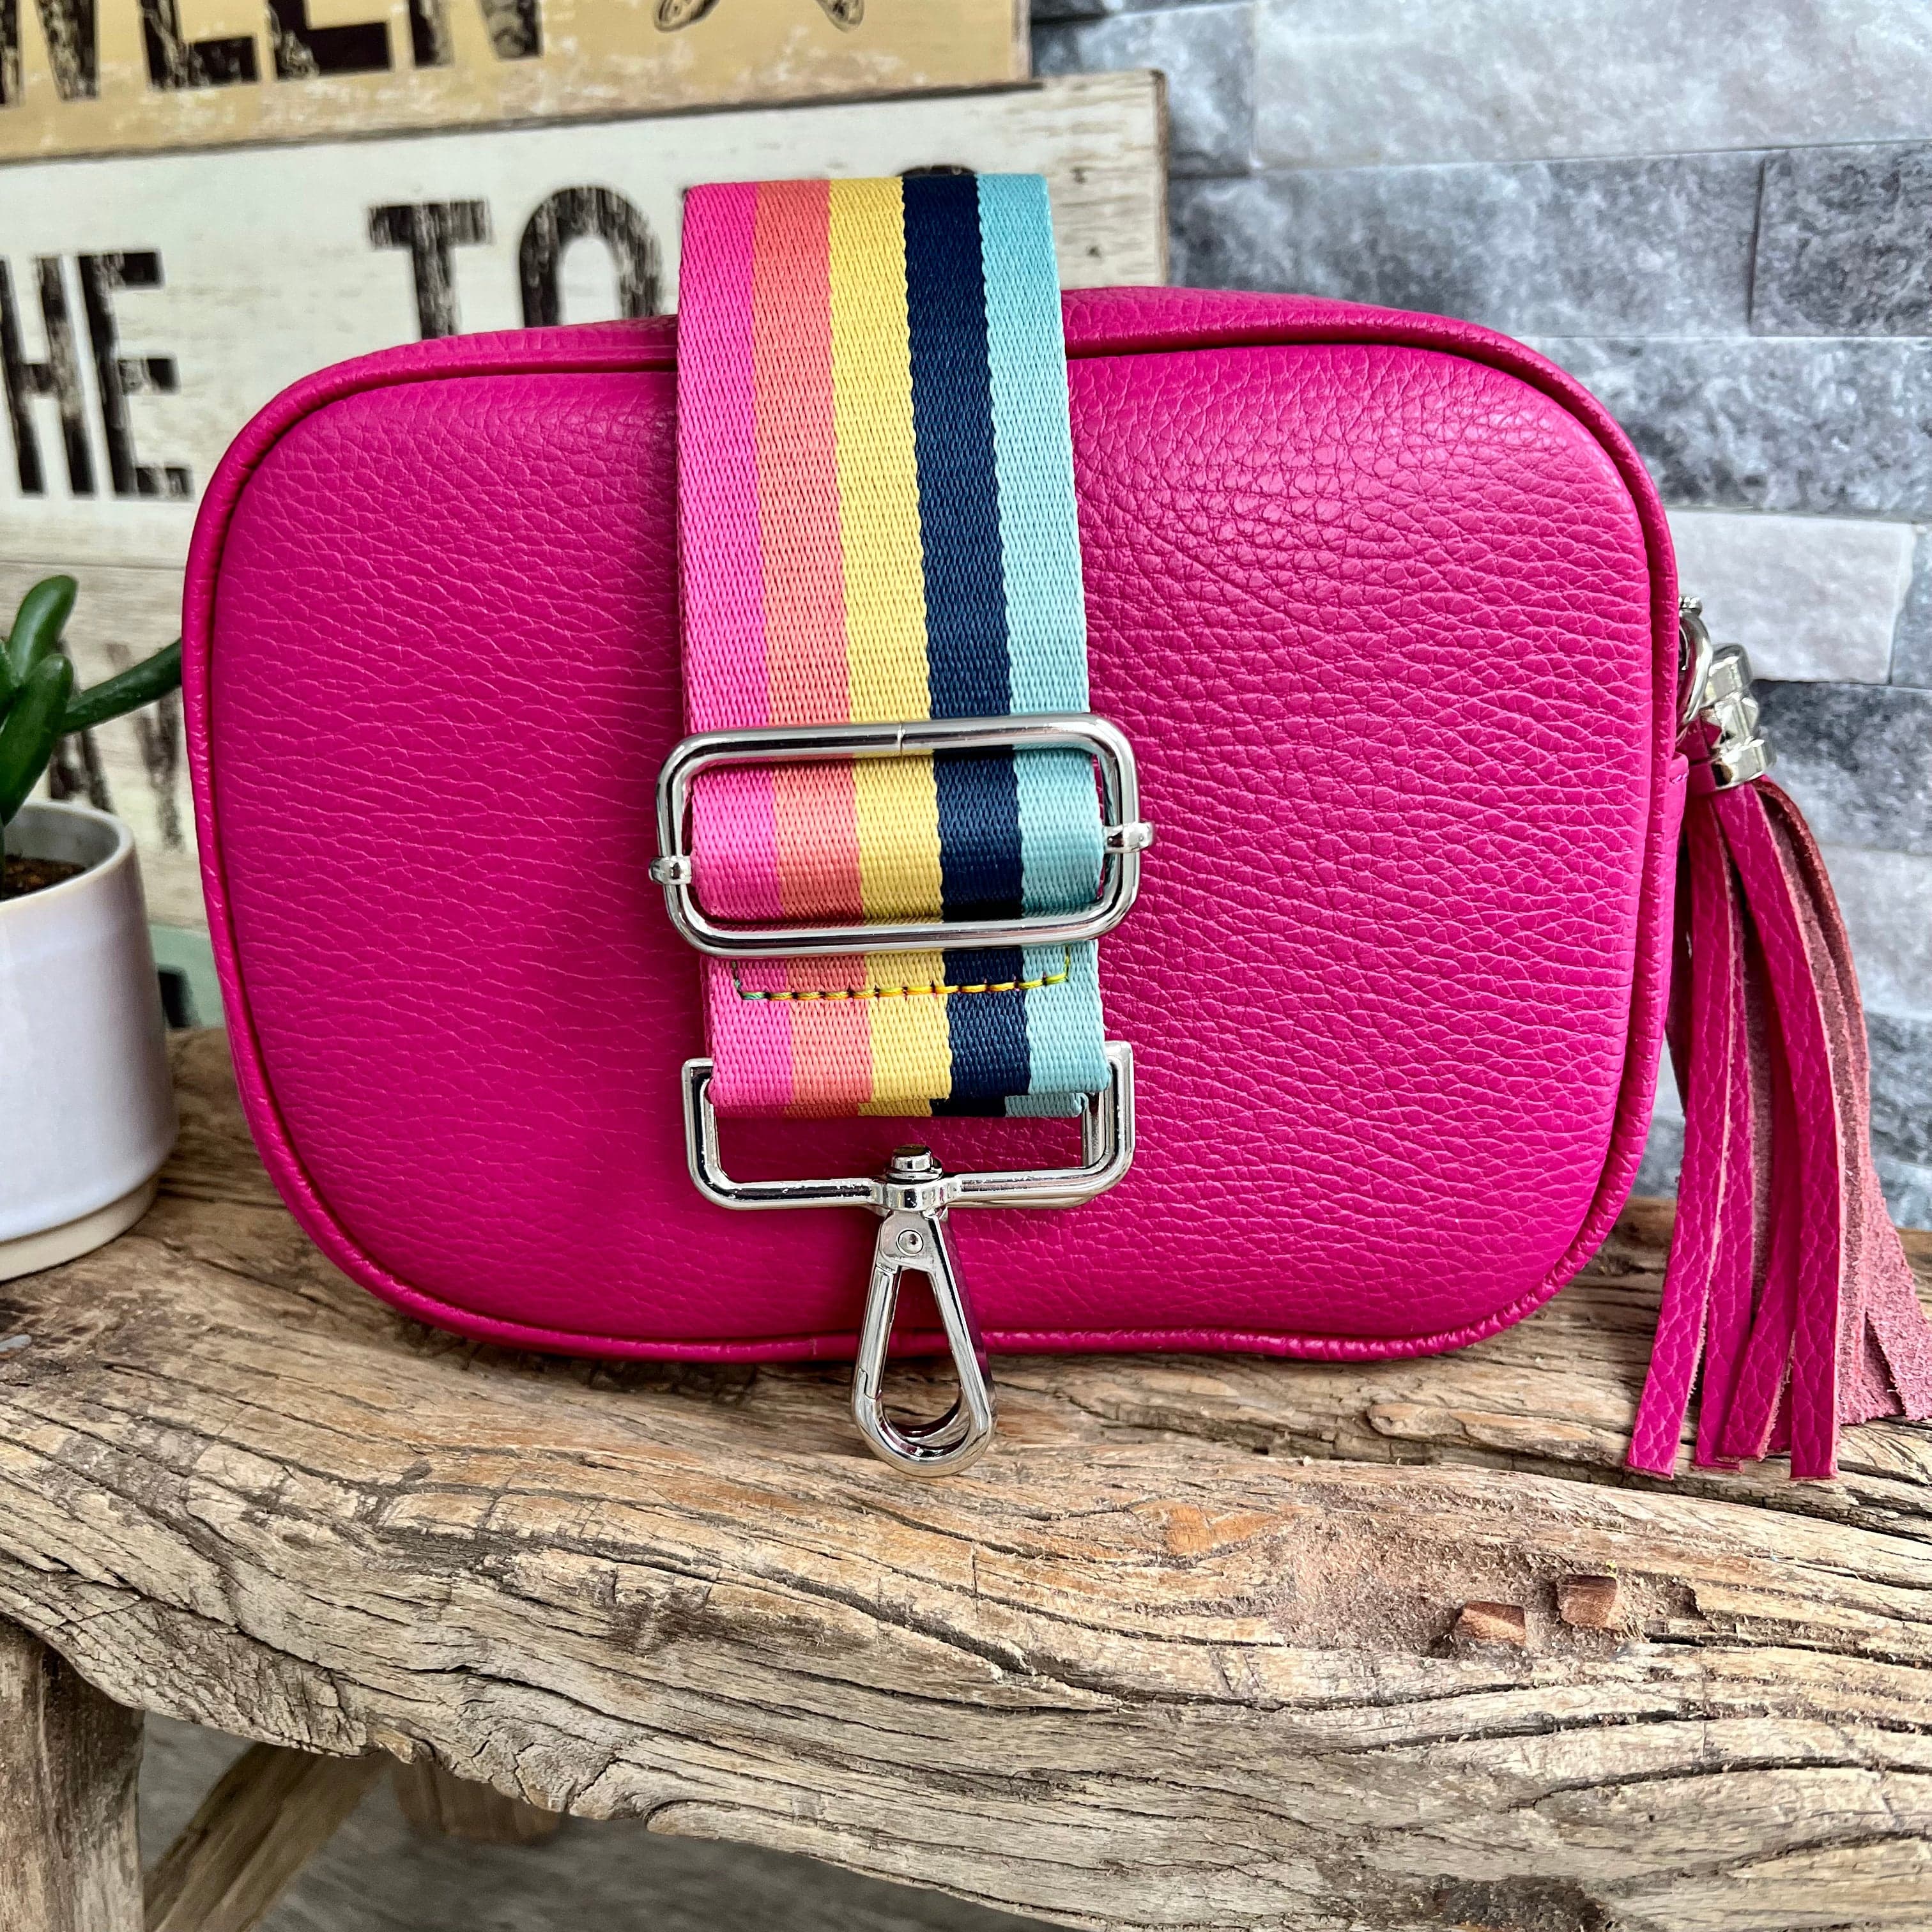 Hot Pink Italian leather camera style crossbody bag with wide